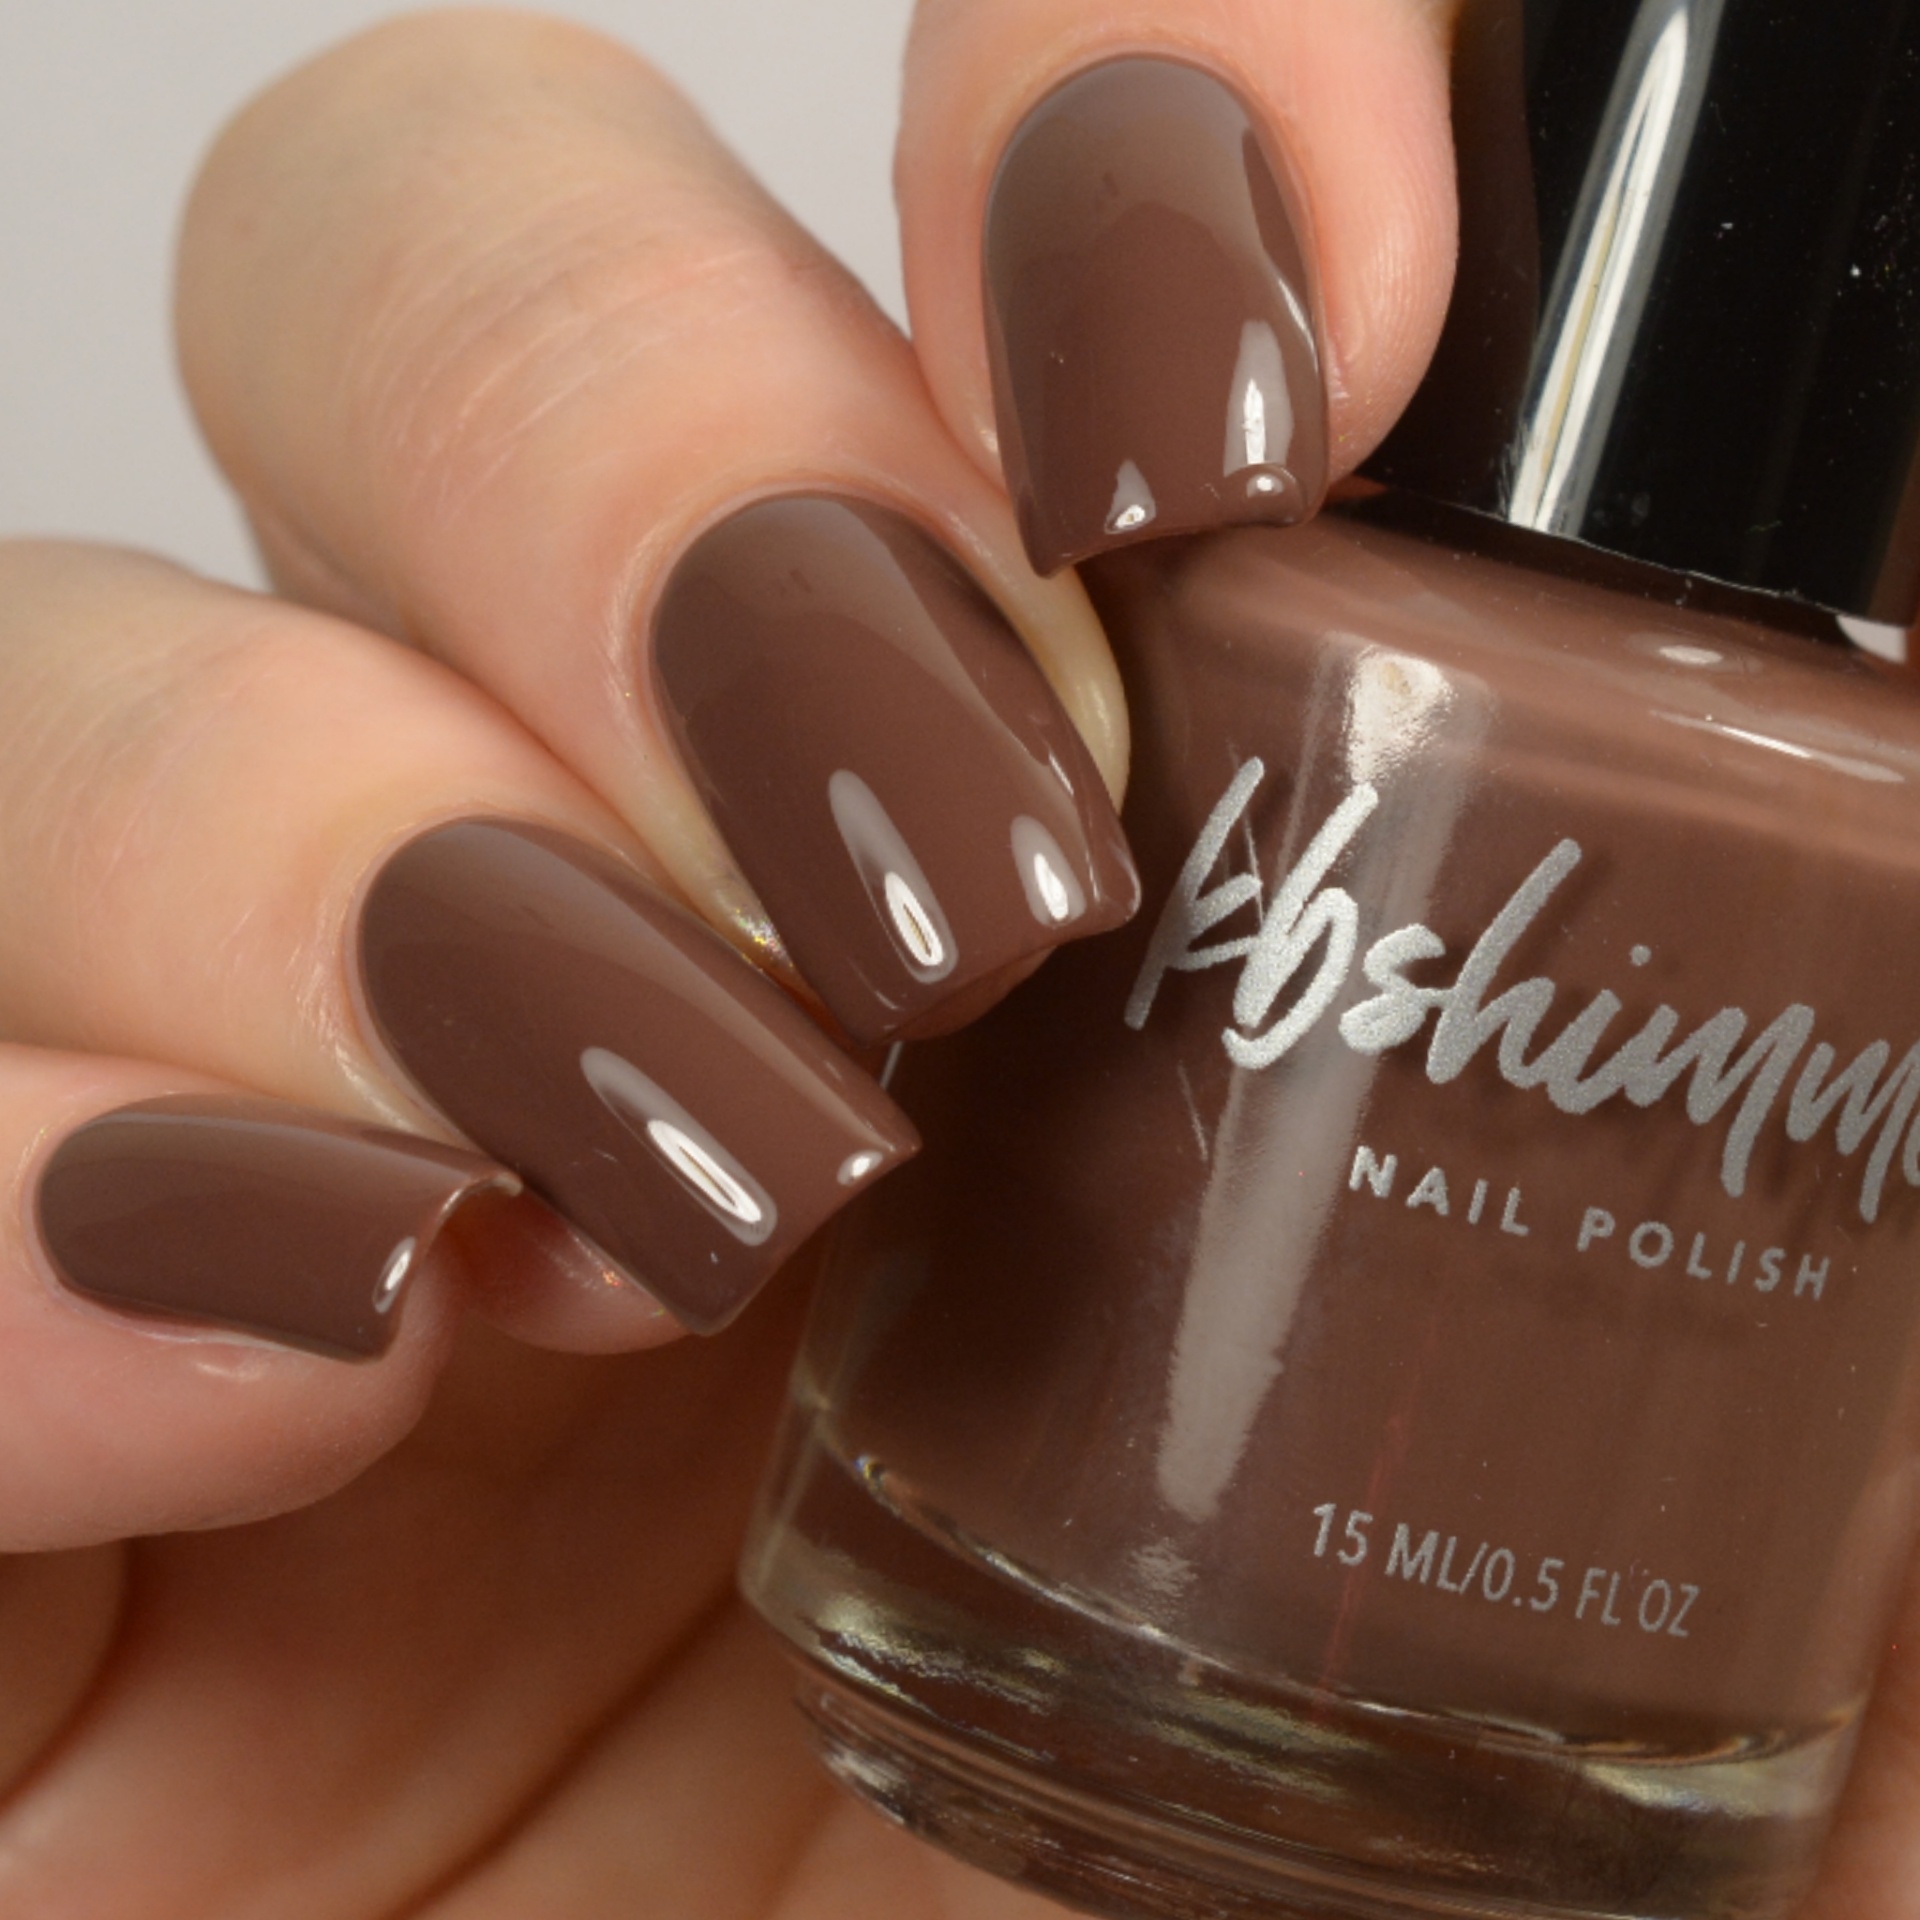 43 Brilliant Brown Nails To Blow Everyone Away! - The Catalog